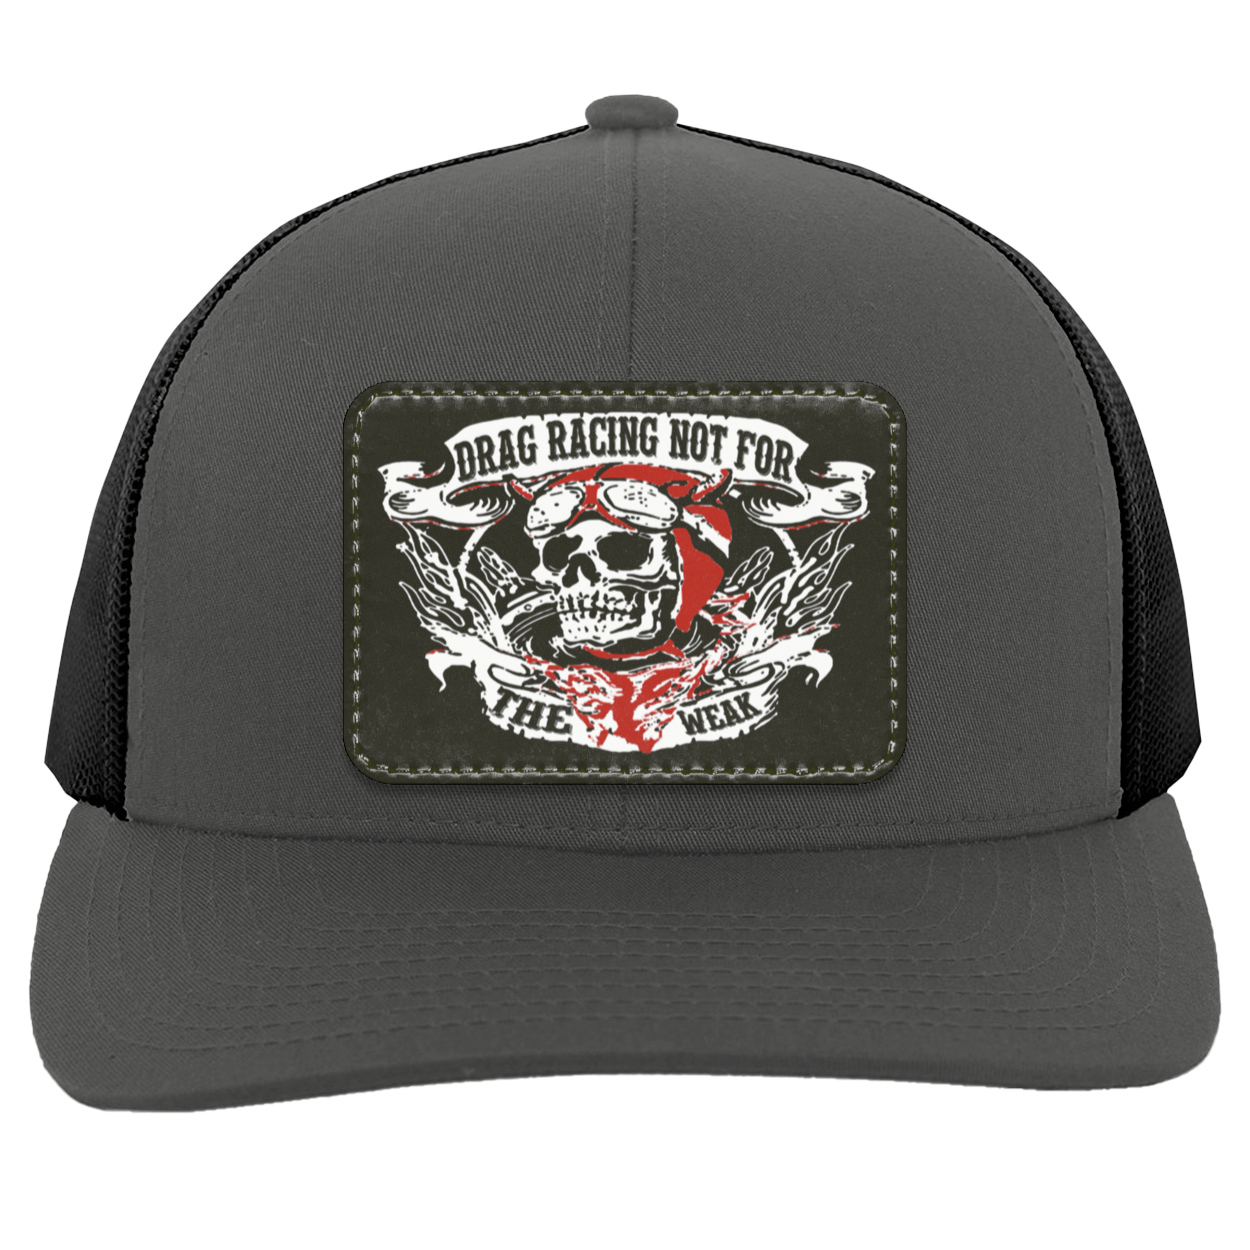 Drag Racing Not For The Weak Trucker Patched Snap Back